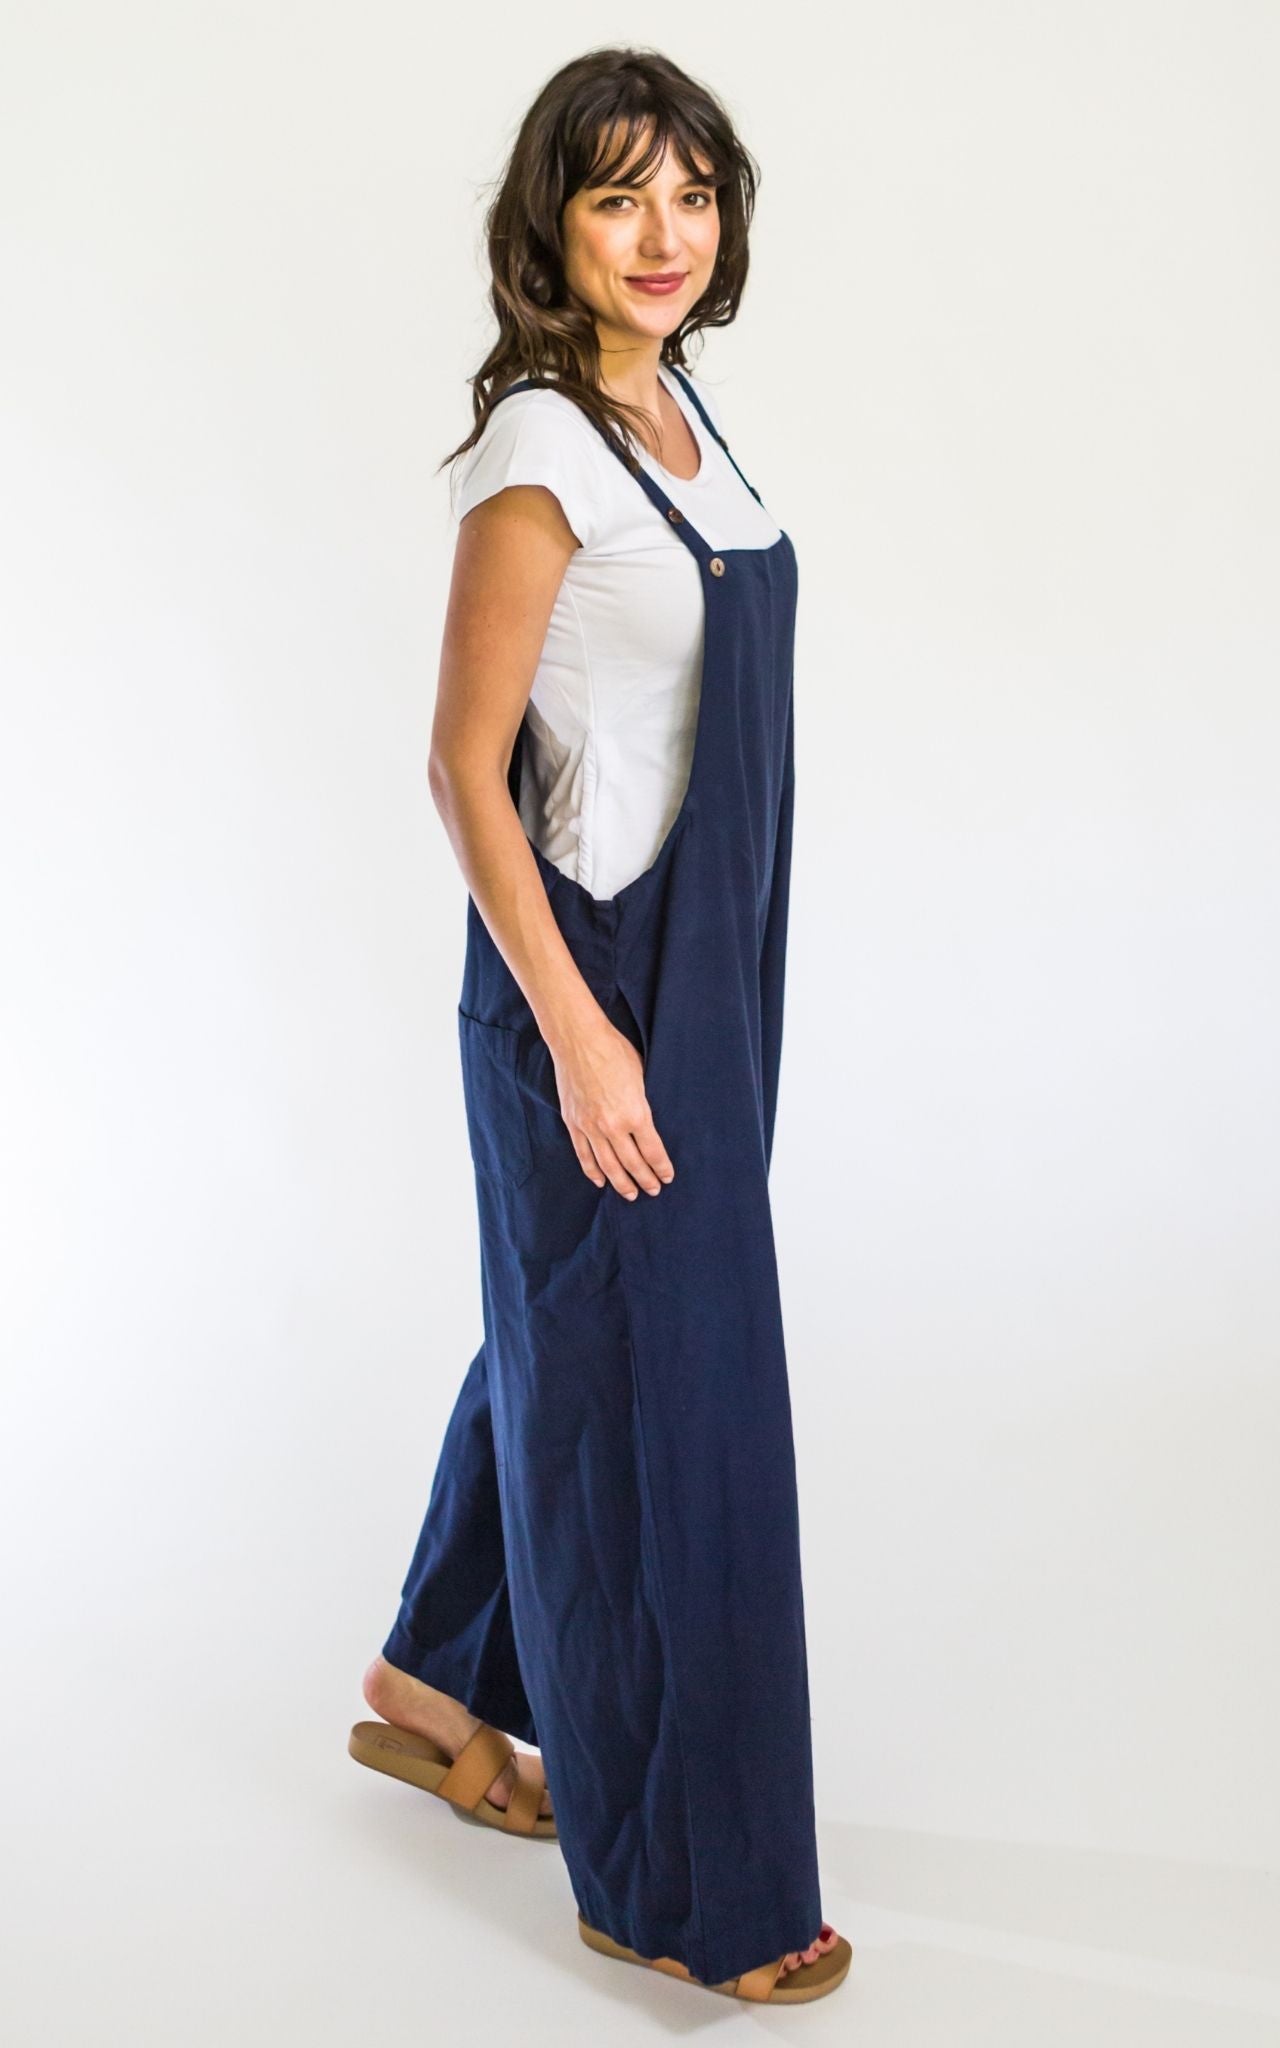 Relaxed fit cotton overalls | Ethically Produced in Nepal – Surya